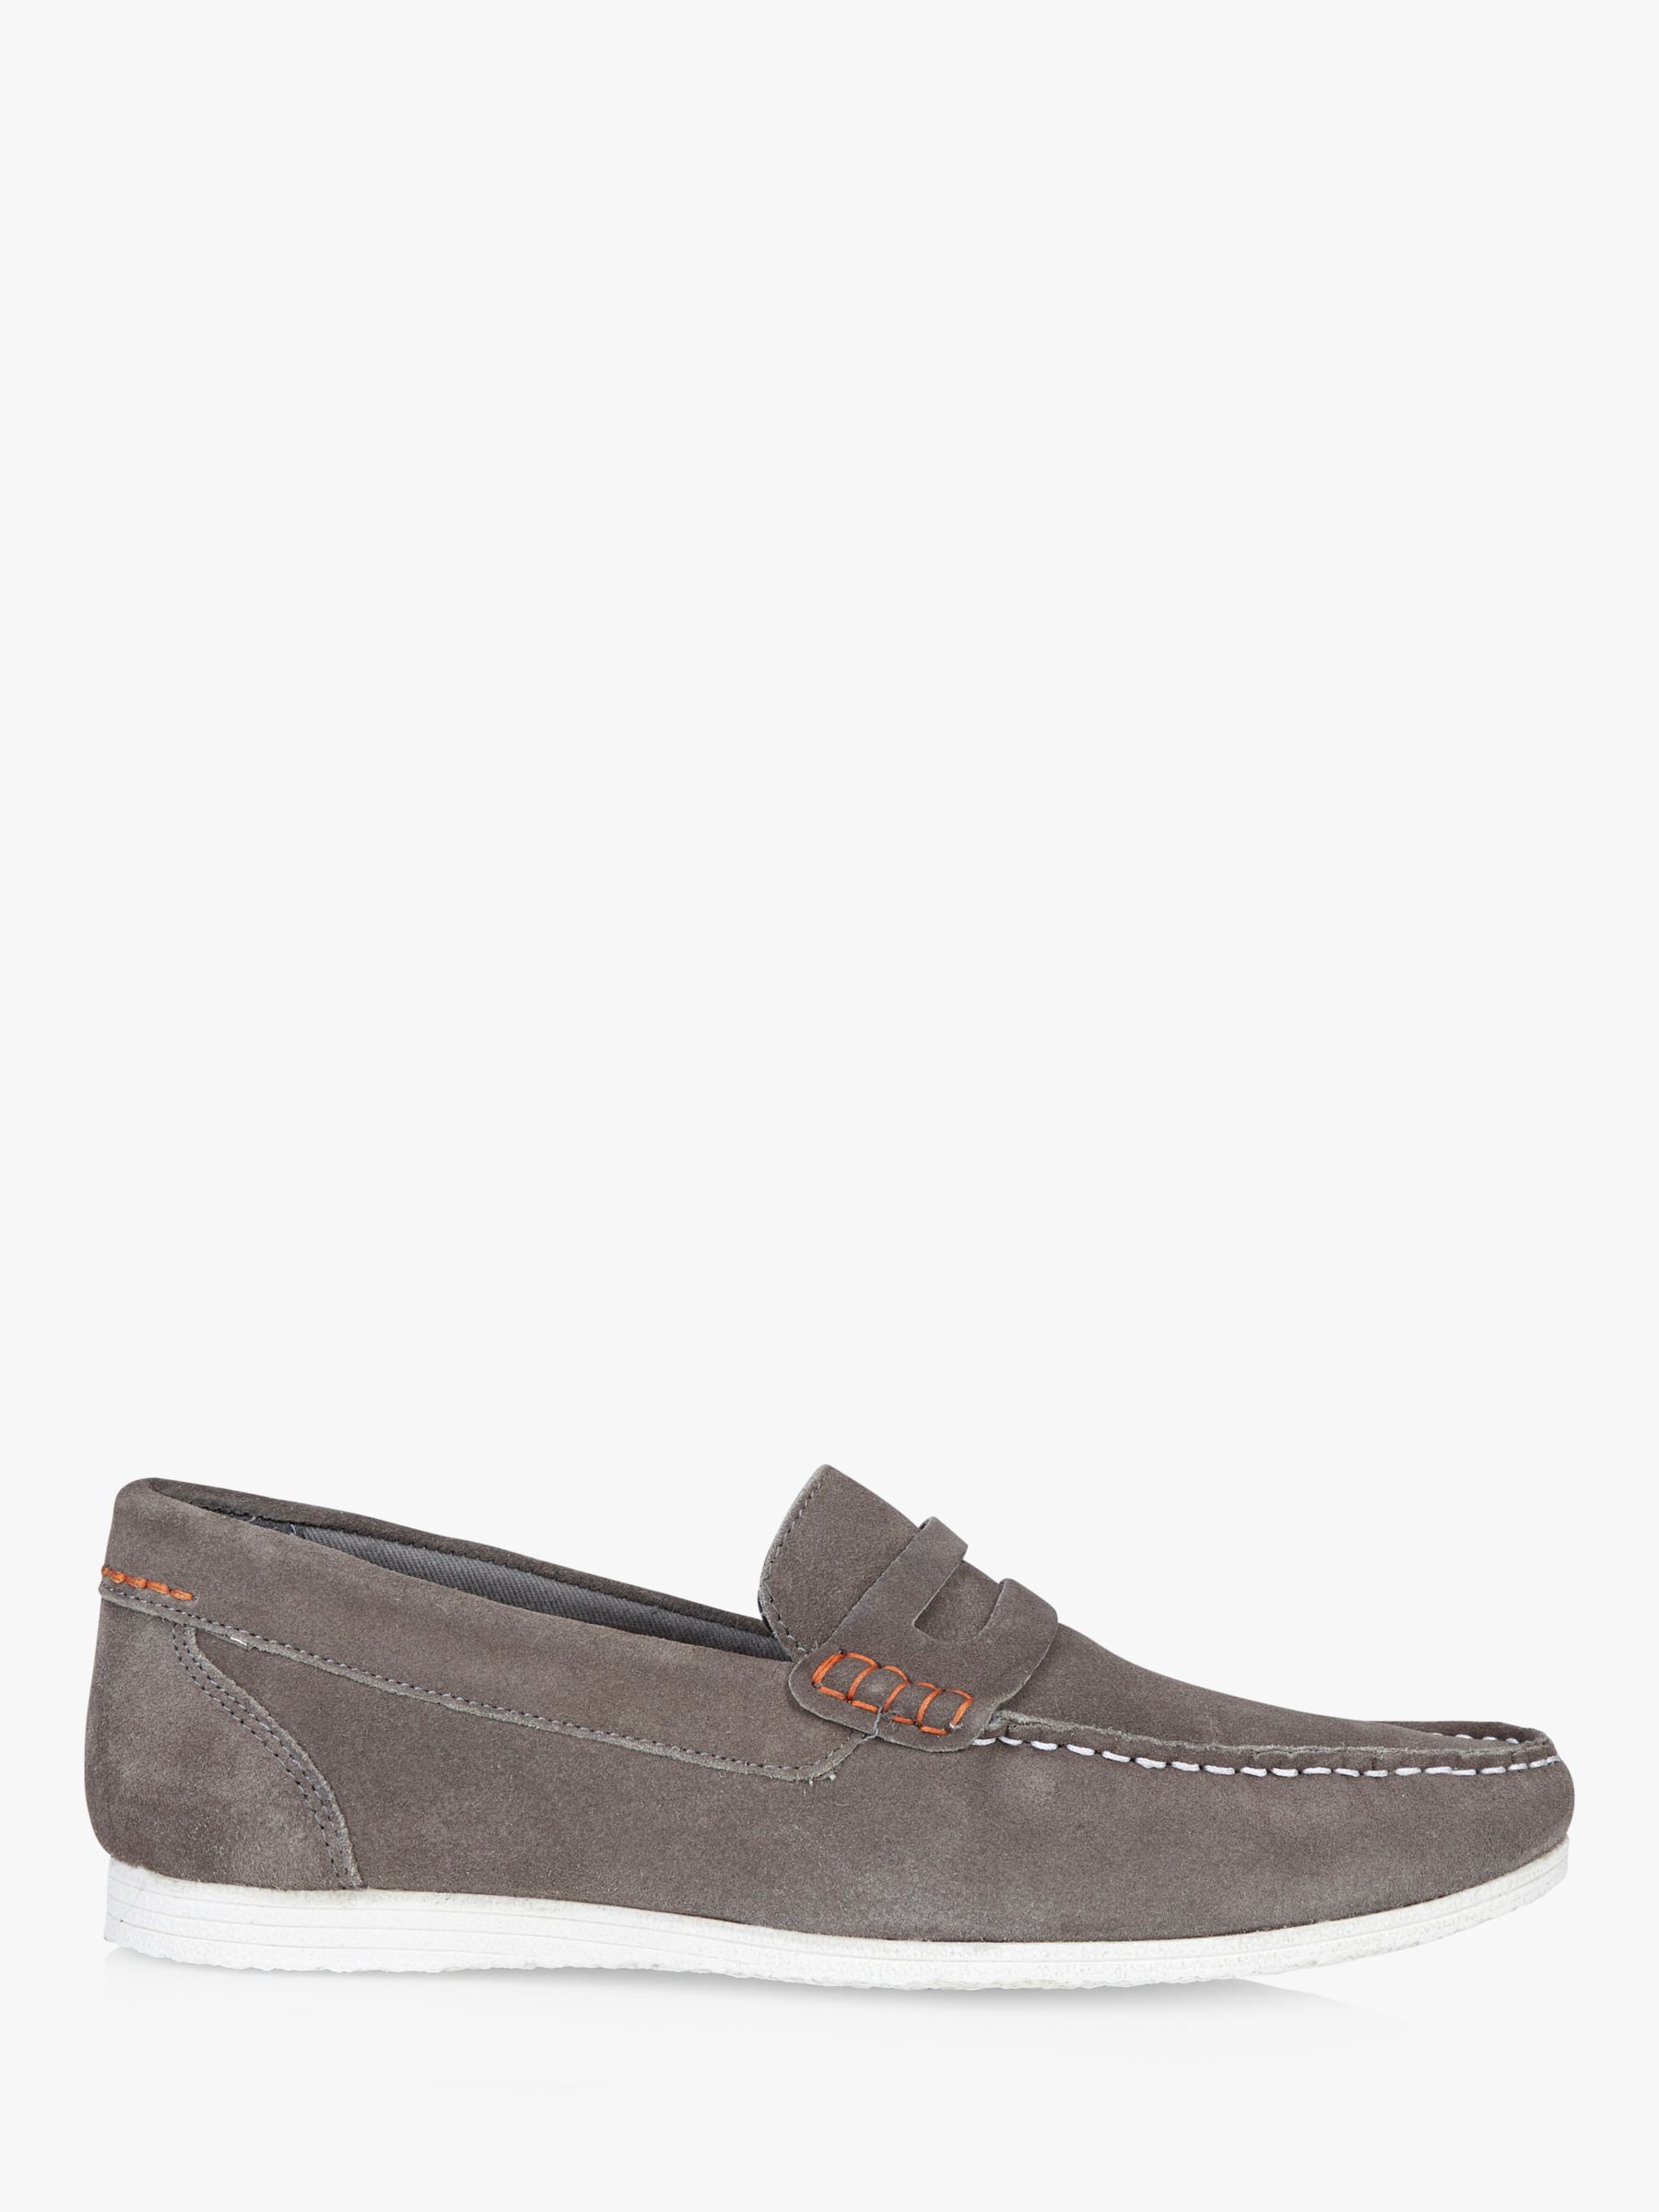 Silver Street London Stanhope Suede Loafers, Grey at John Lewis & Partners